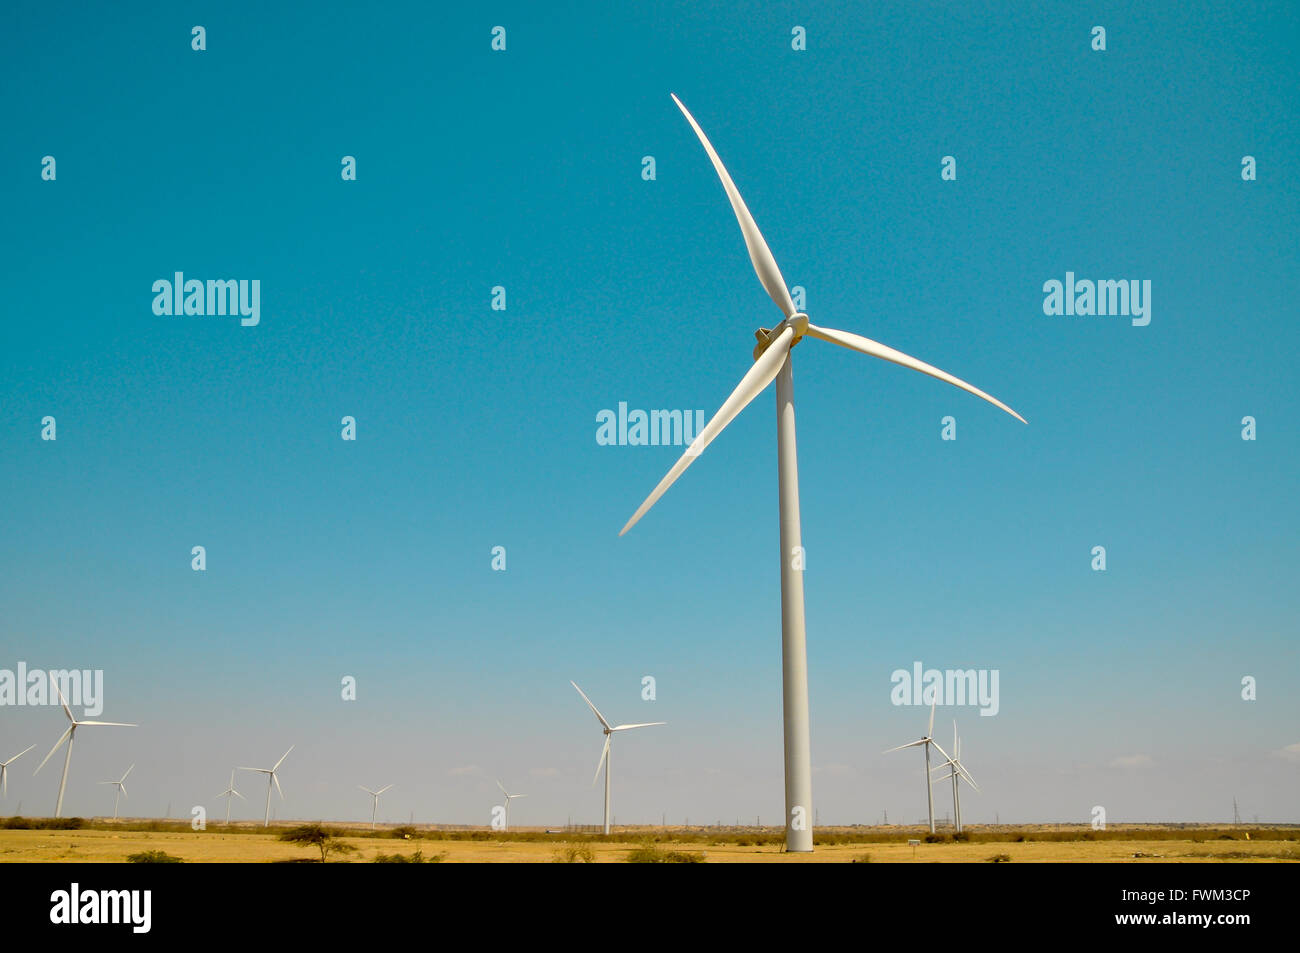 Low Angle View Of Windmills Against Blue Sky Stock Photo